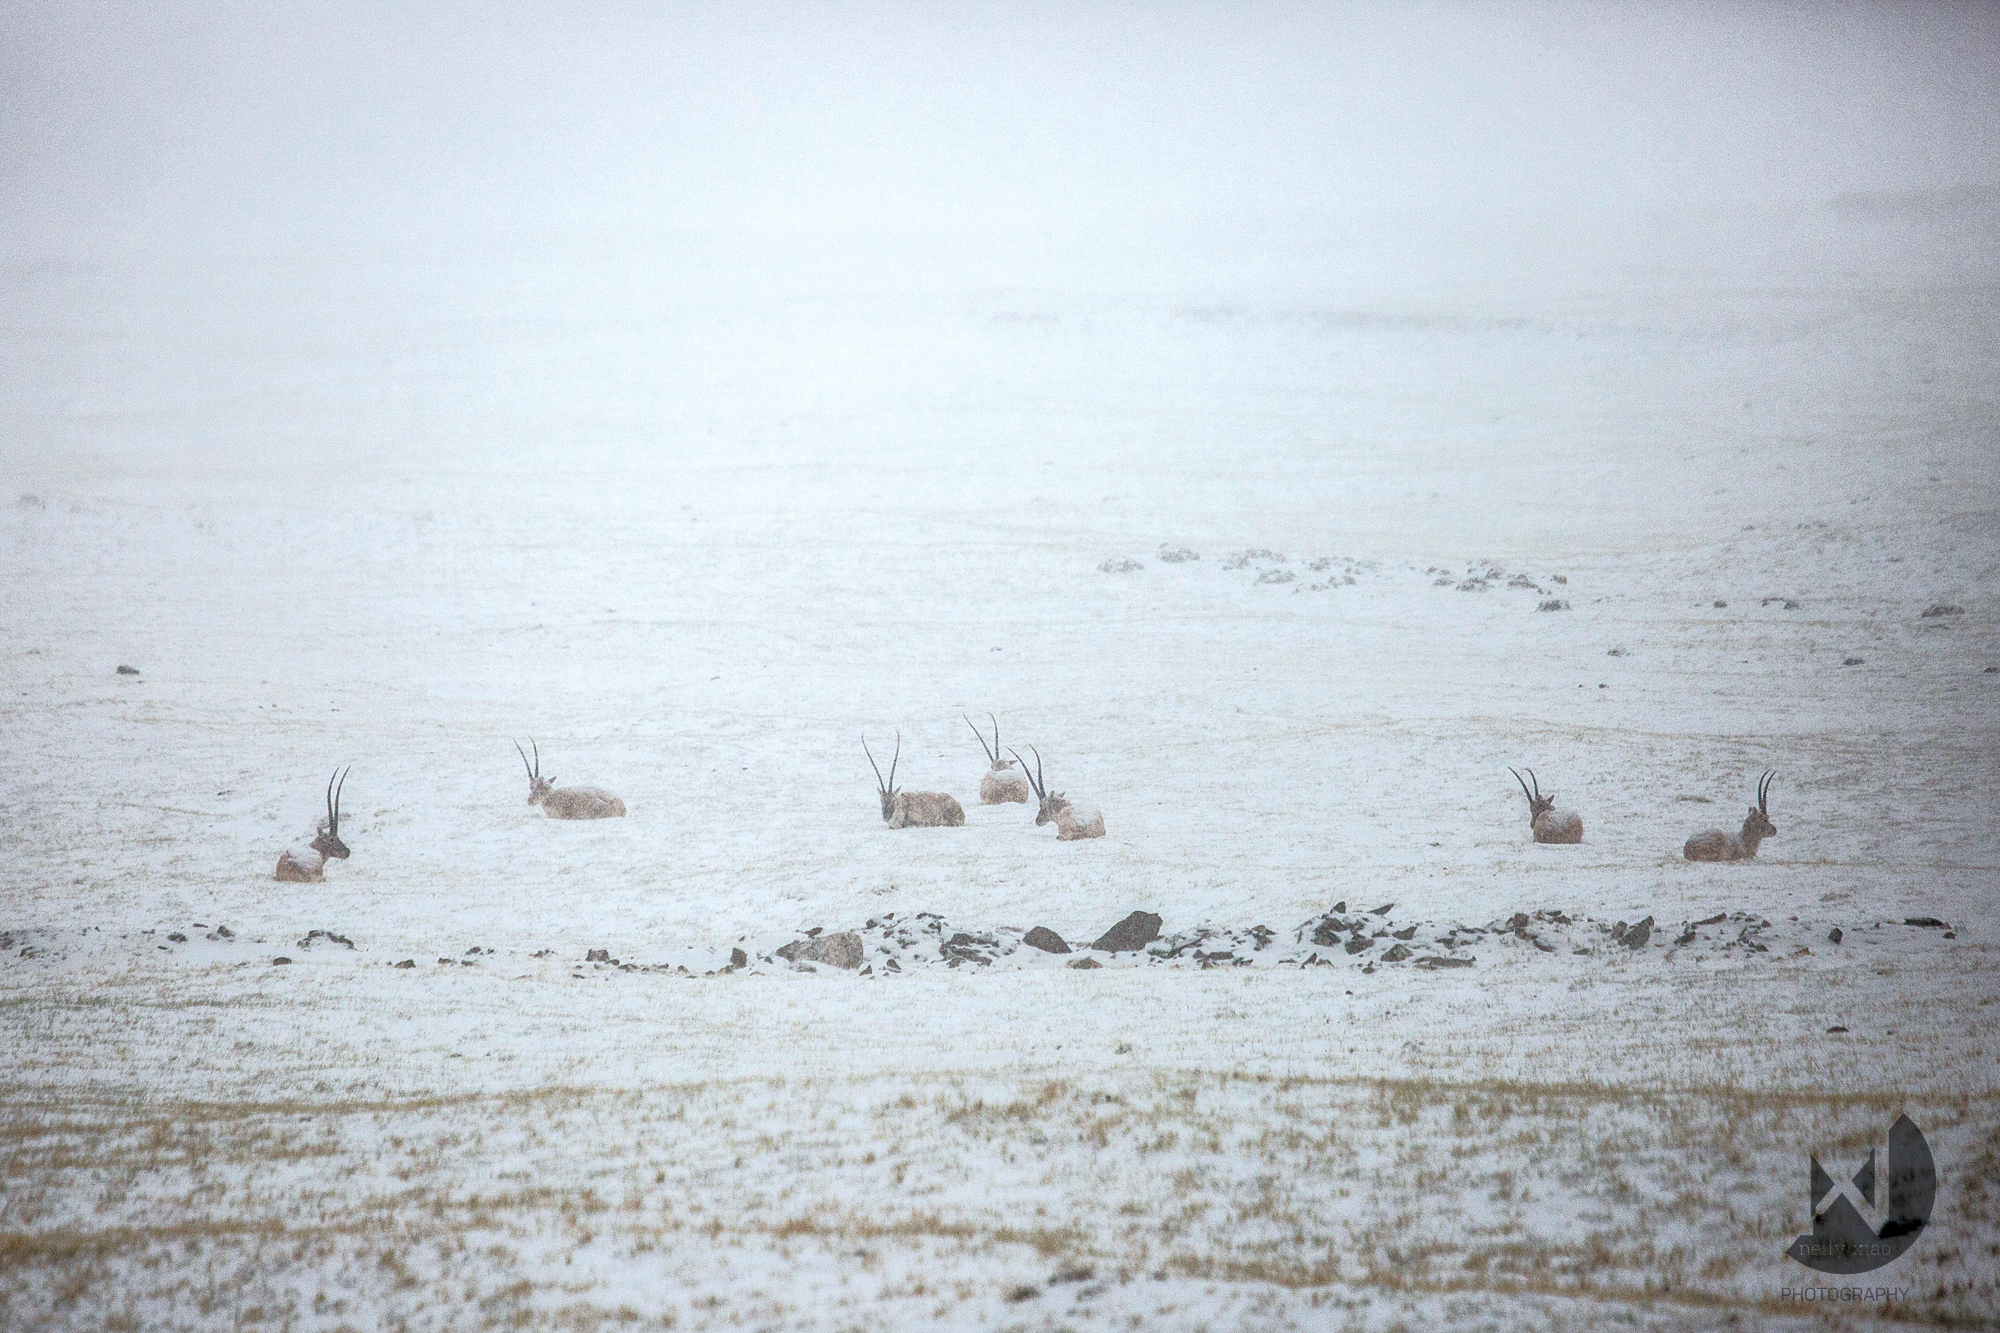   Male Tibetan antelopes nested during a sudden snow storm   Kekexili Wildlife Conservation, May 2015&nbsp; 